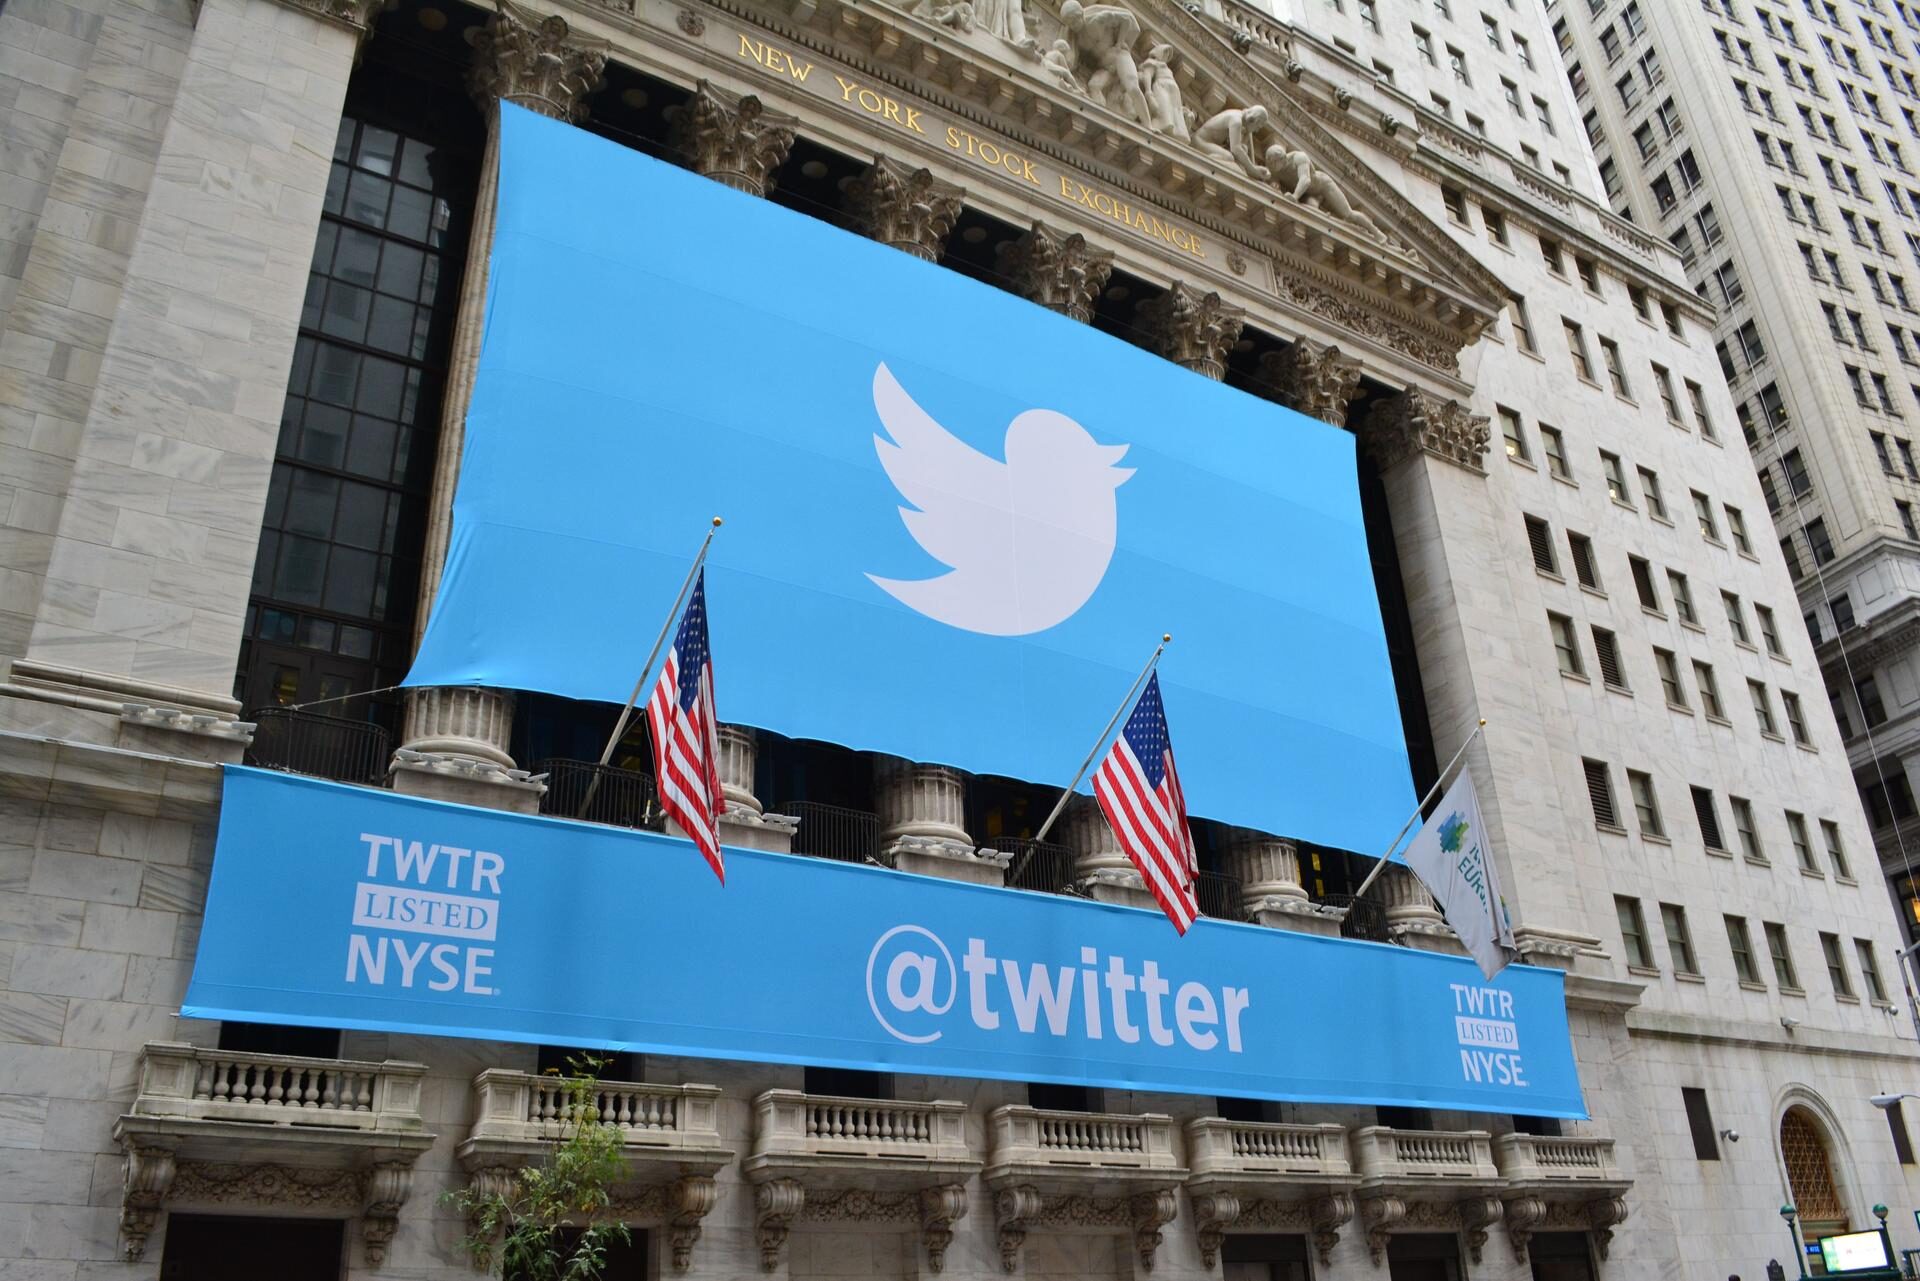 NYSE twitter